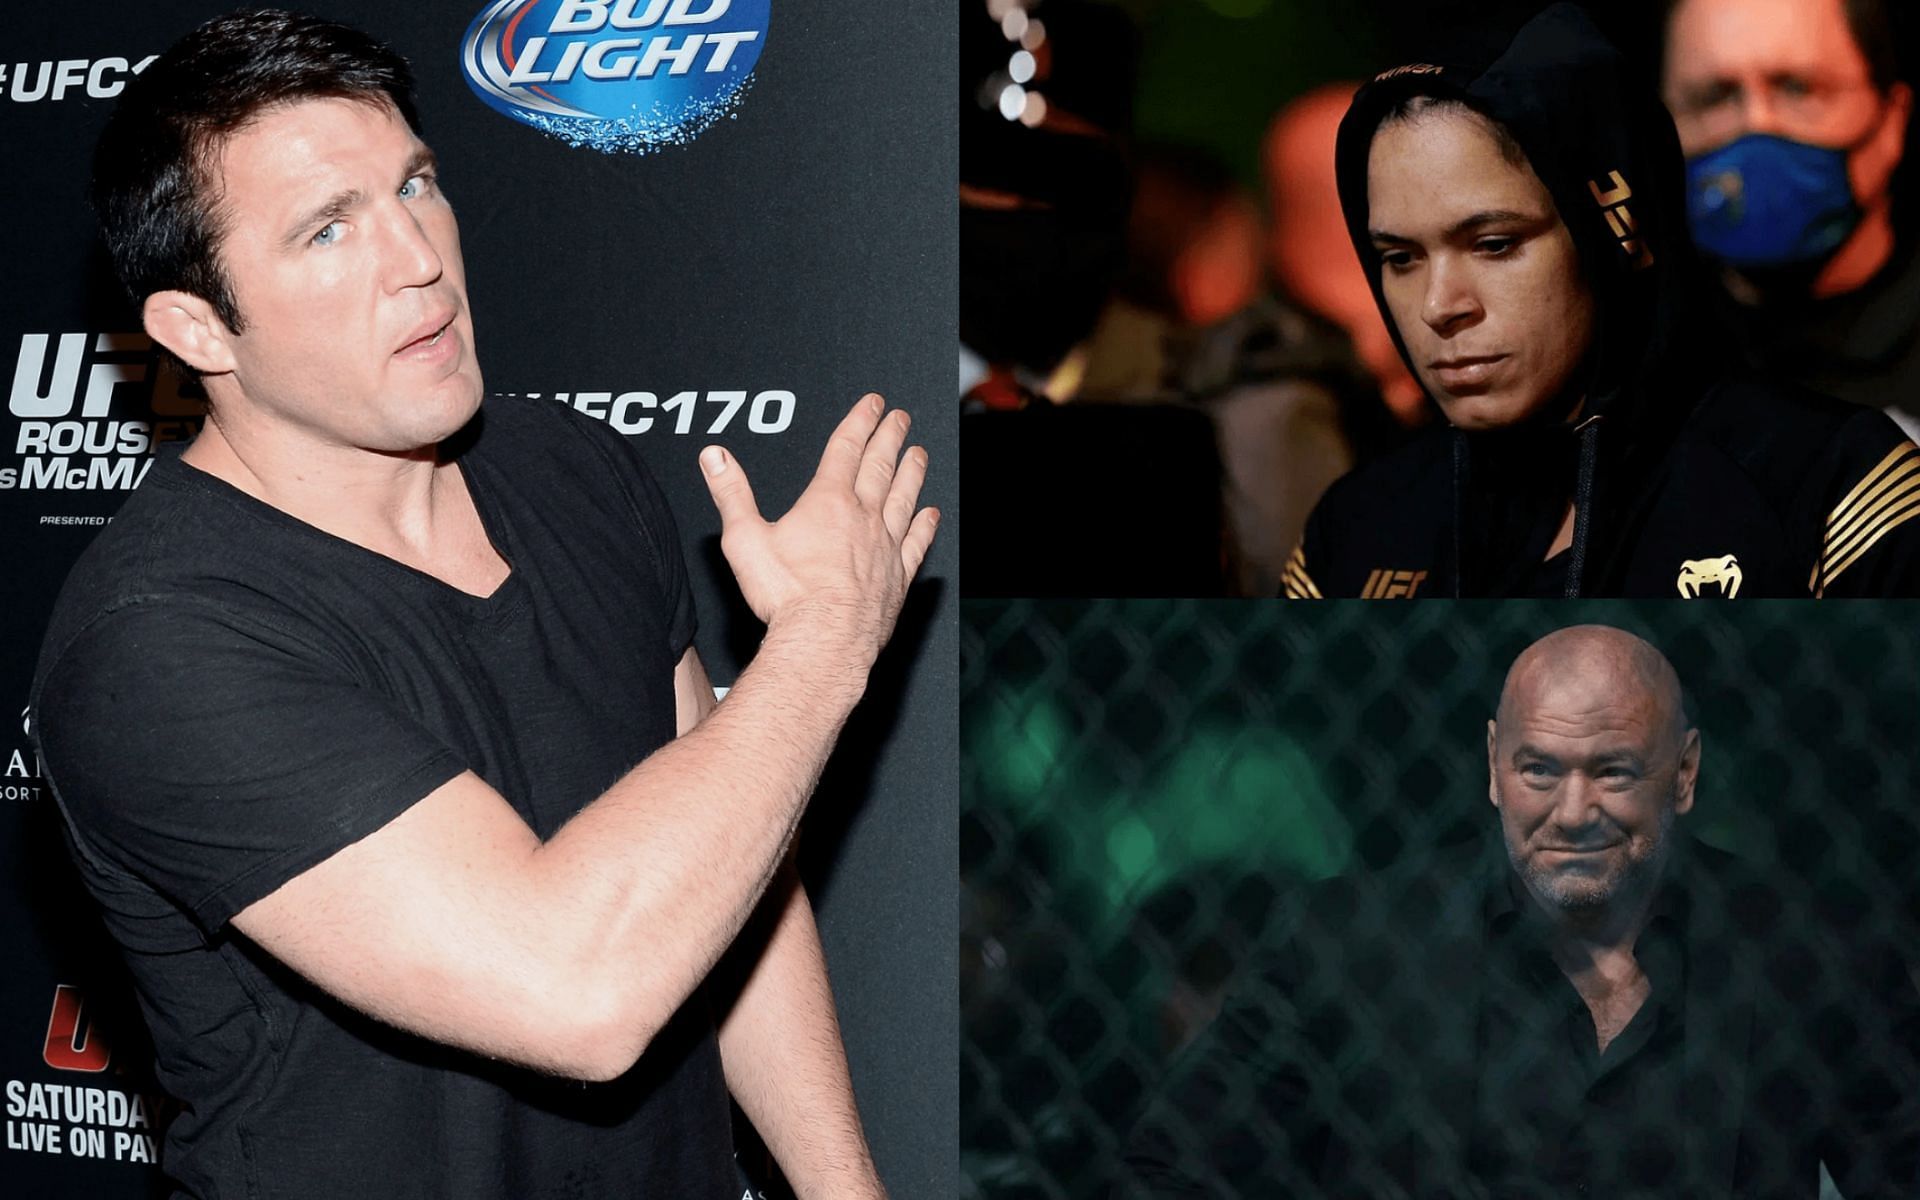 Chael Sonnen (left), Amanda Nunes (top right), and Dana White (bottom right) [Images courtesy of Getty]